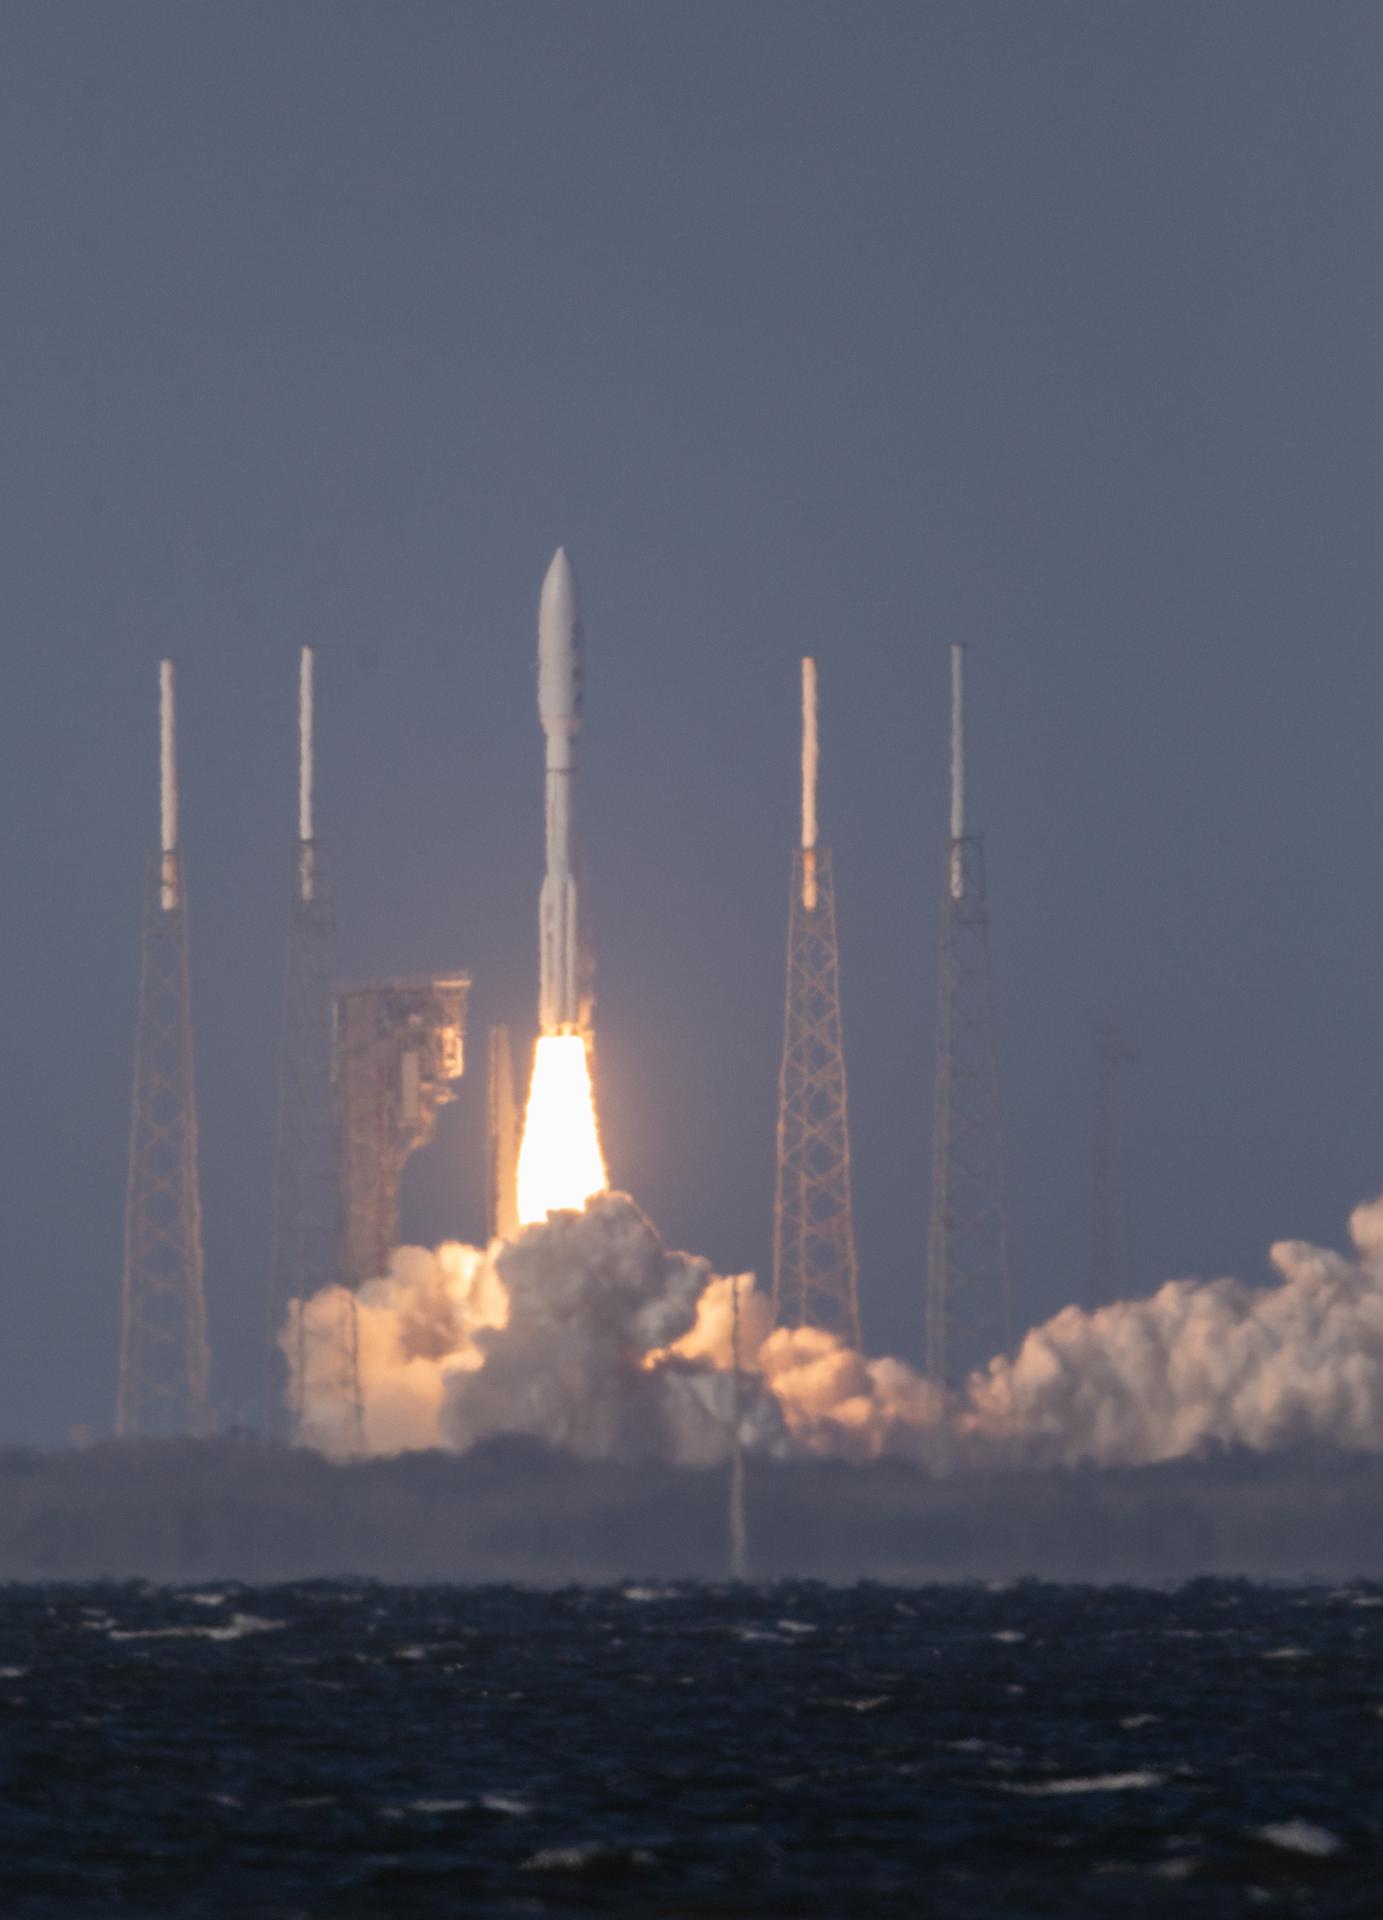 NOAA's GOES-T satellite launch from Cape Canaveral Space Force Station